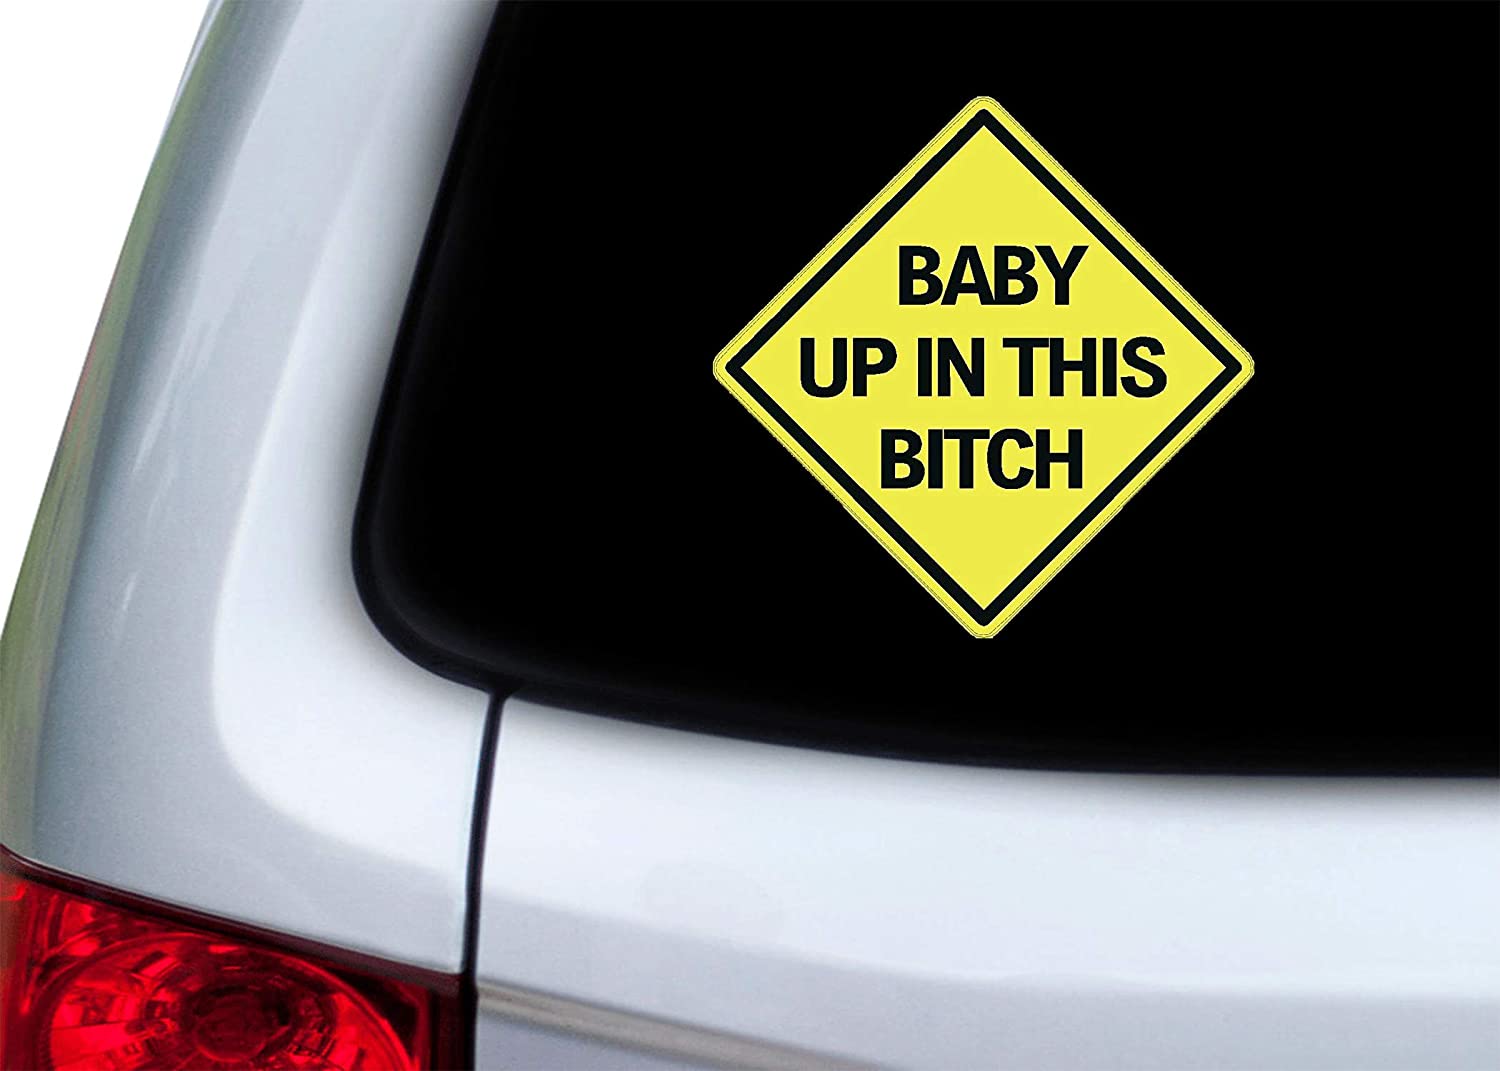 Rogue River Tactical Baby Up in This Bitch Sticker Funny Auto Decal Bumper Vehicle Safety Sticker Sign for Car Truck SUV